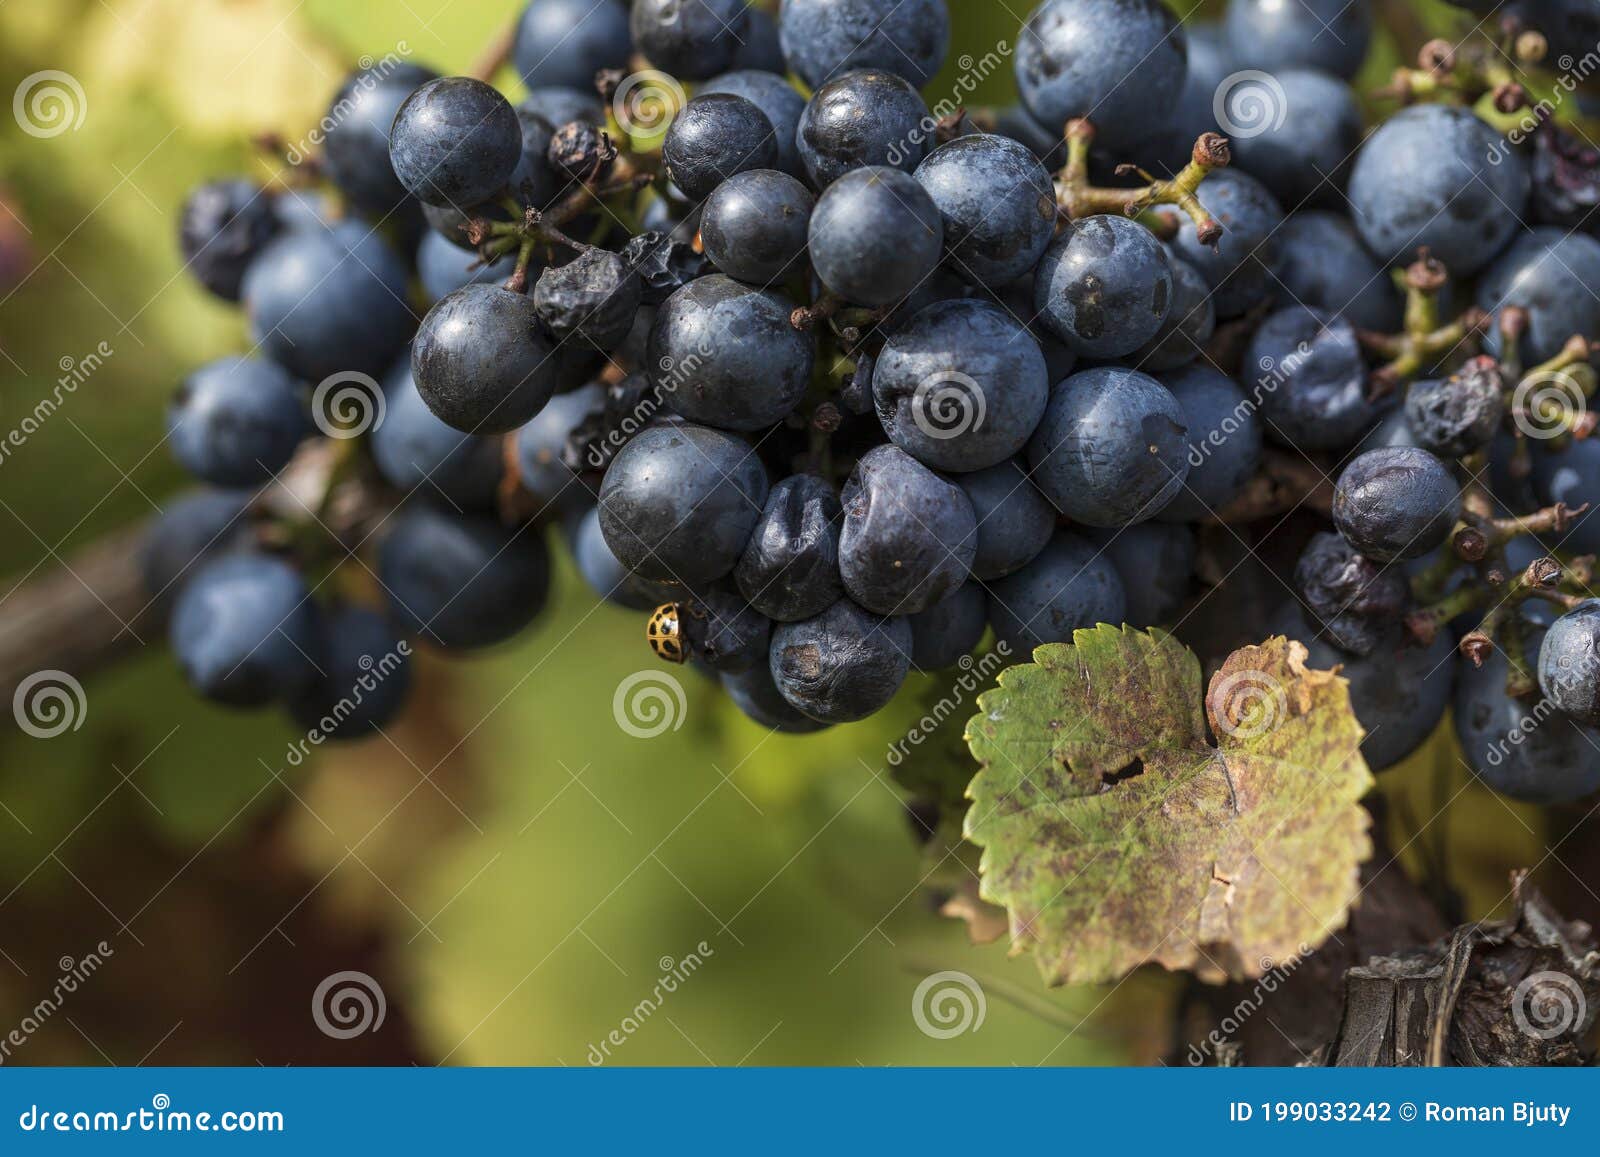 close-up photo of blue grapes in the vineyard. there is a beetle on a ball of grapes